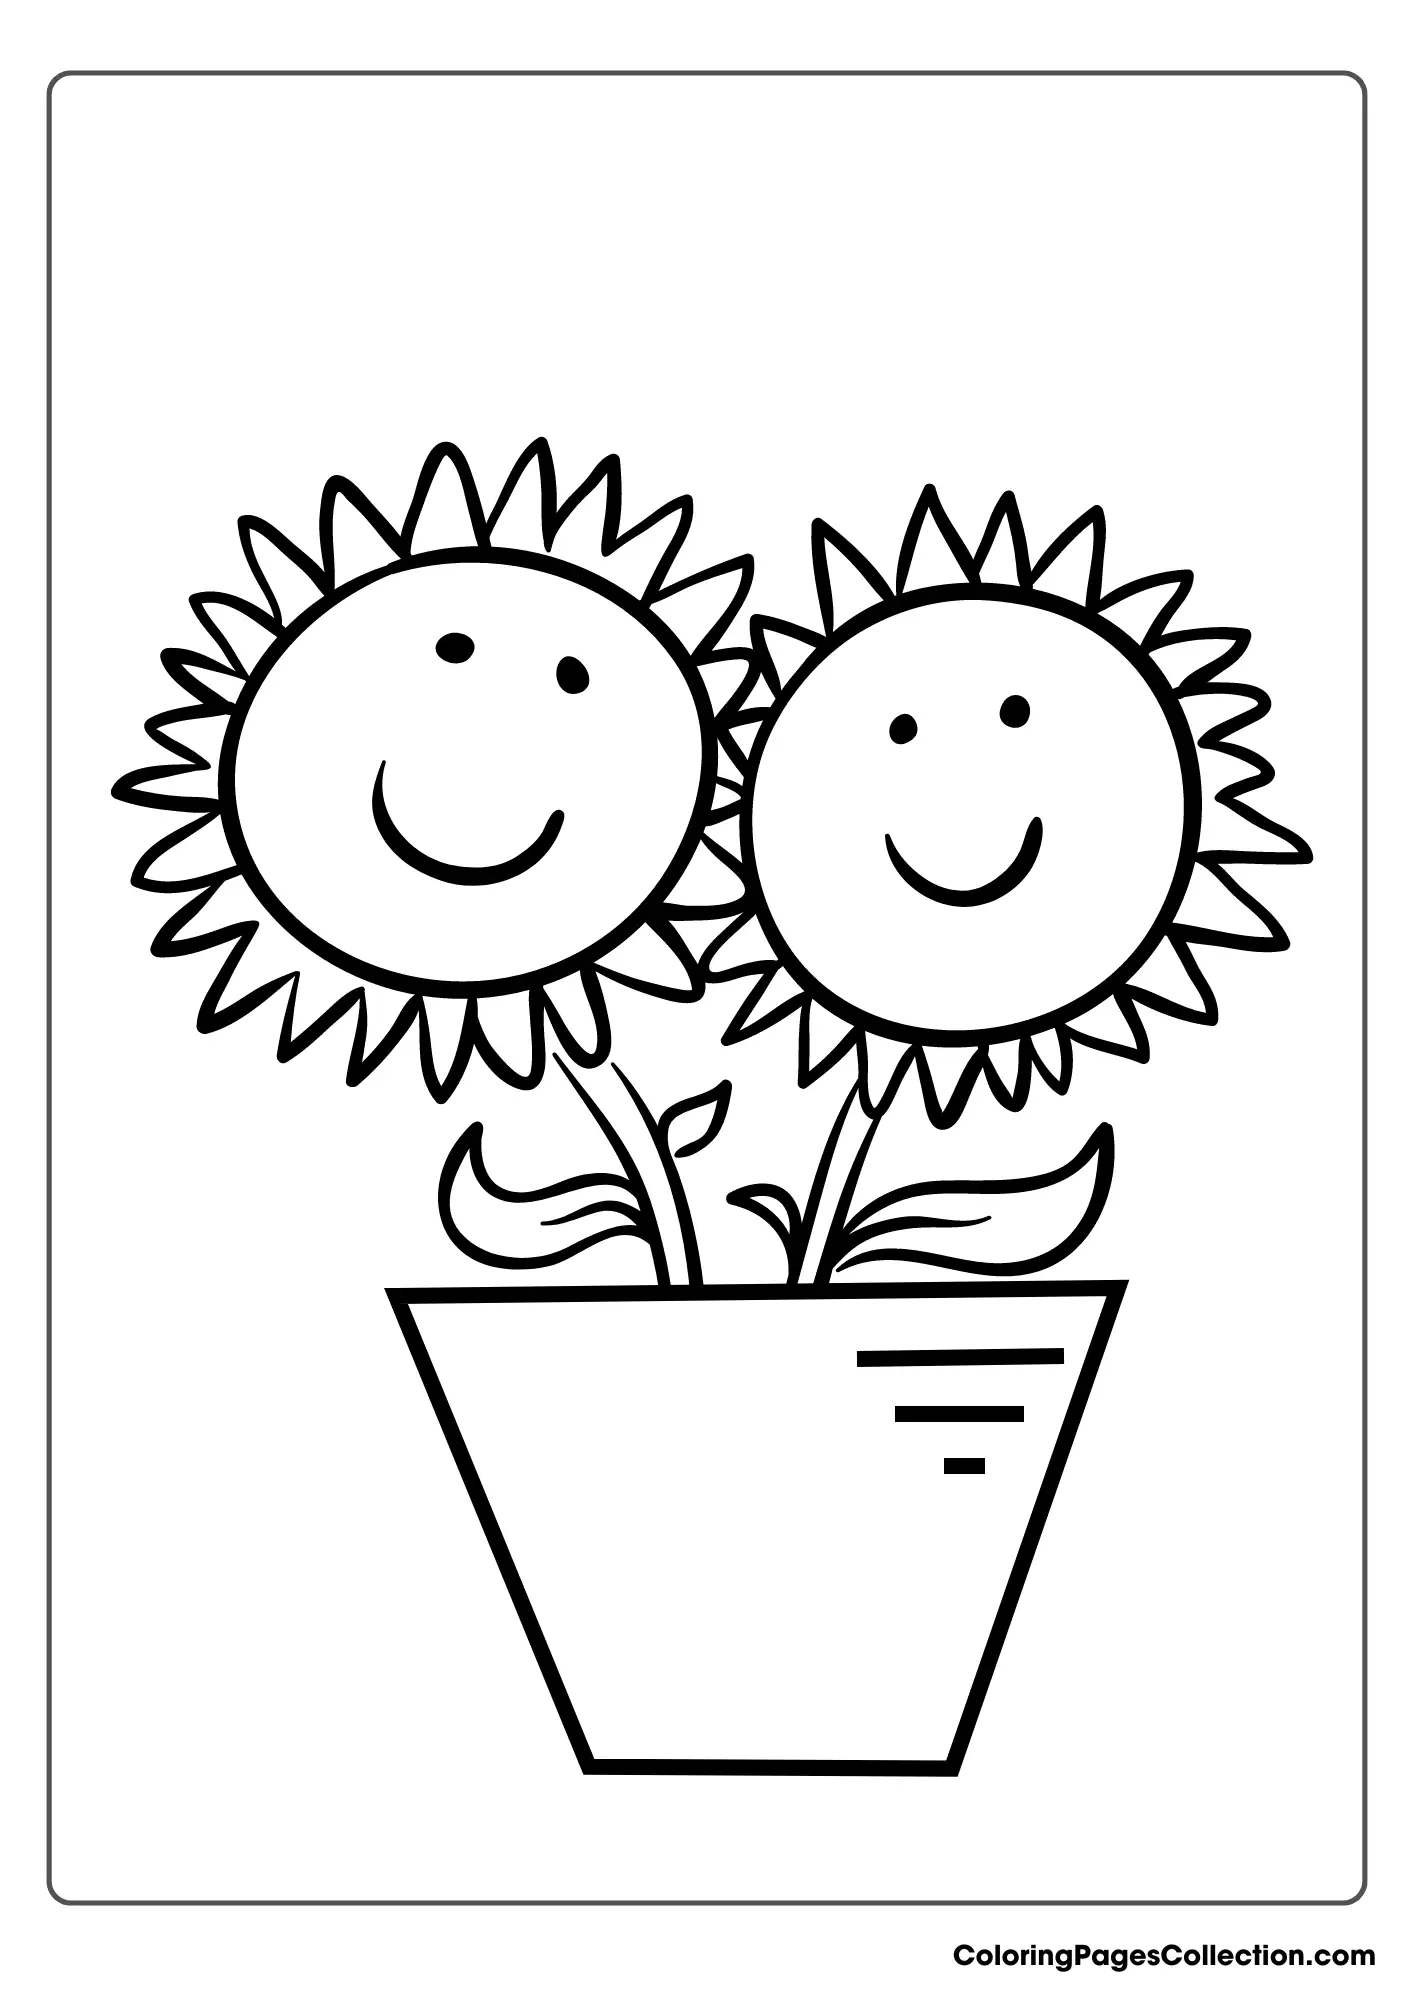 Two Smiling Sunflowers In A Pot Coloring Page